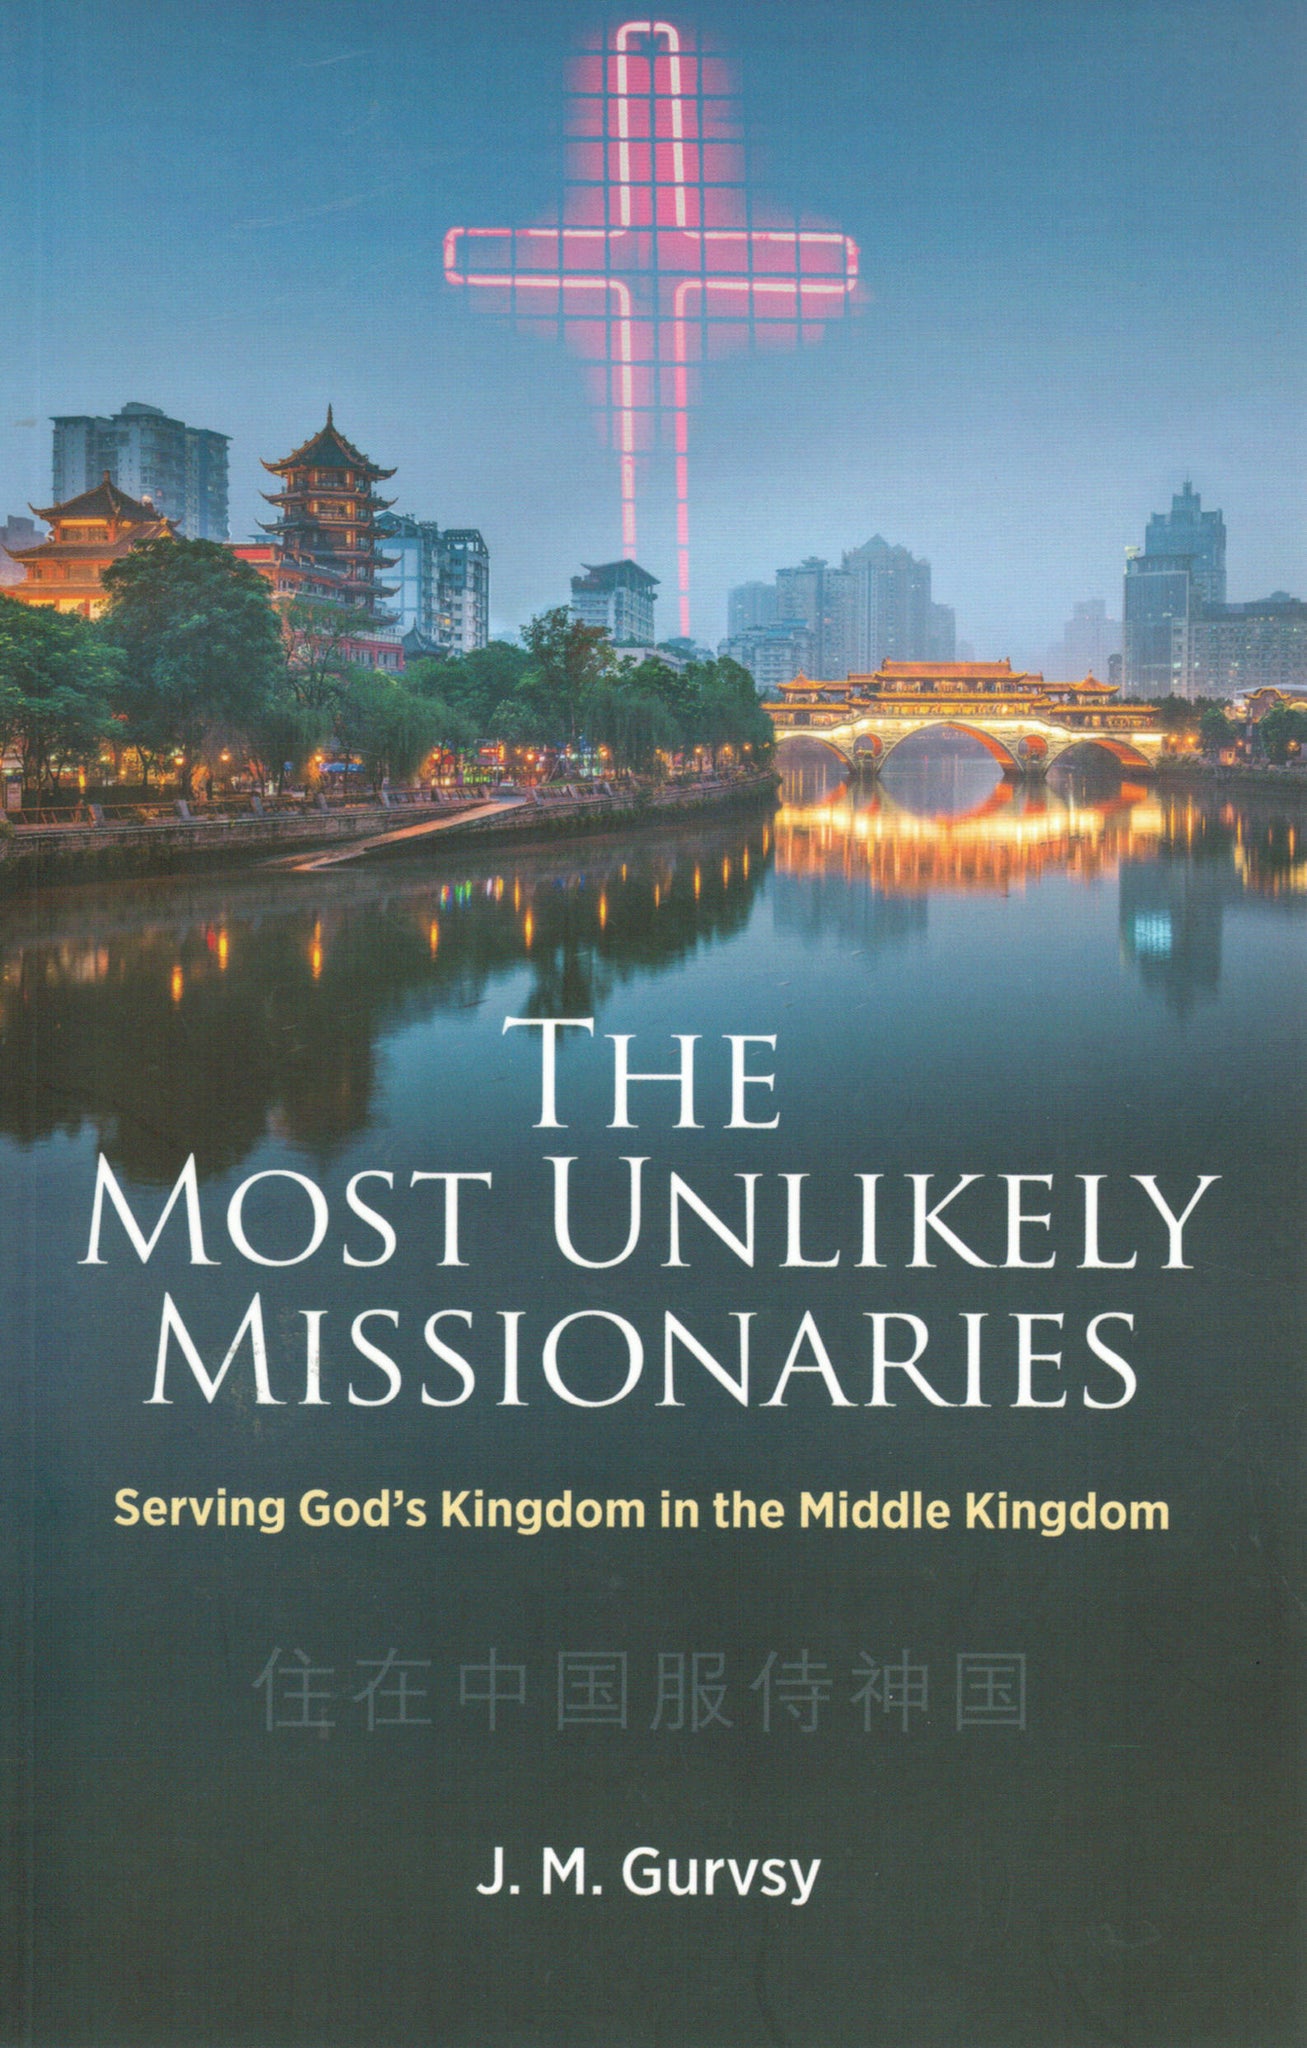 The Most Unlikely Missionaries: Serving God’s Kingdom in the Middle Kingdom